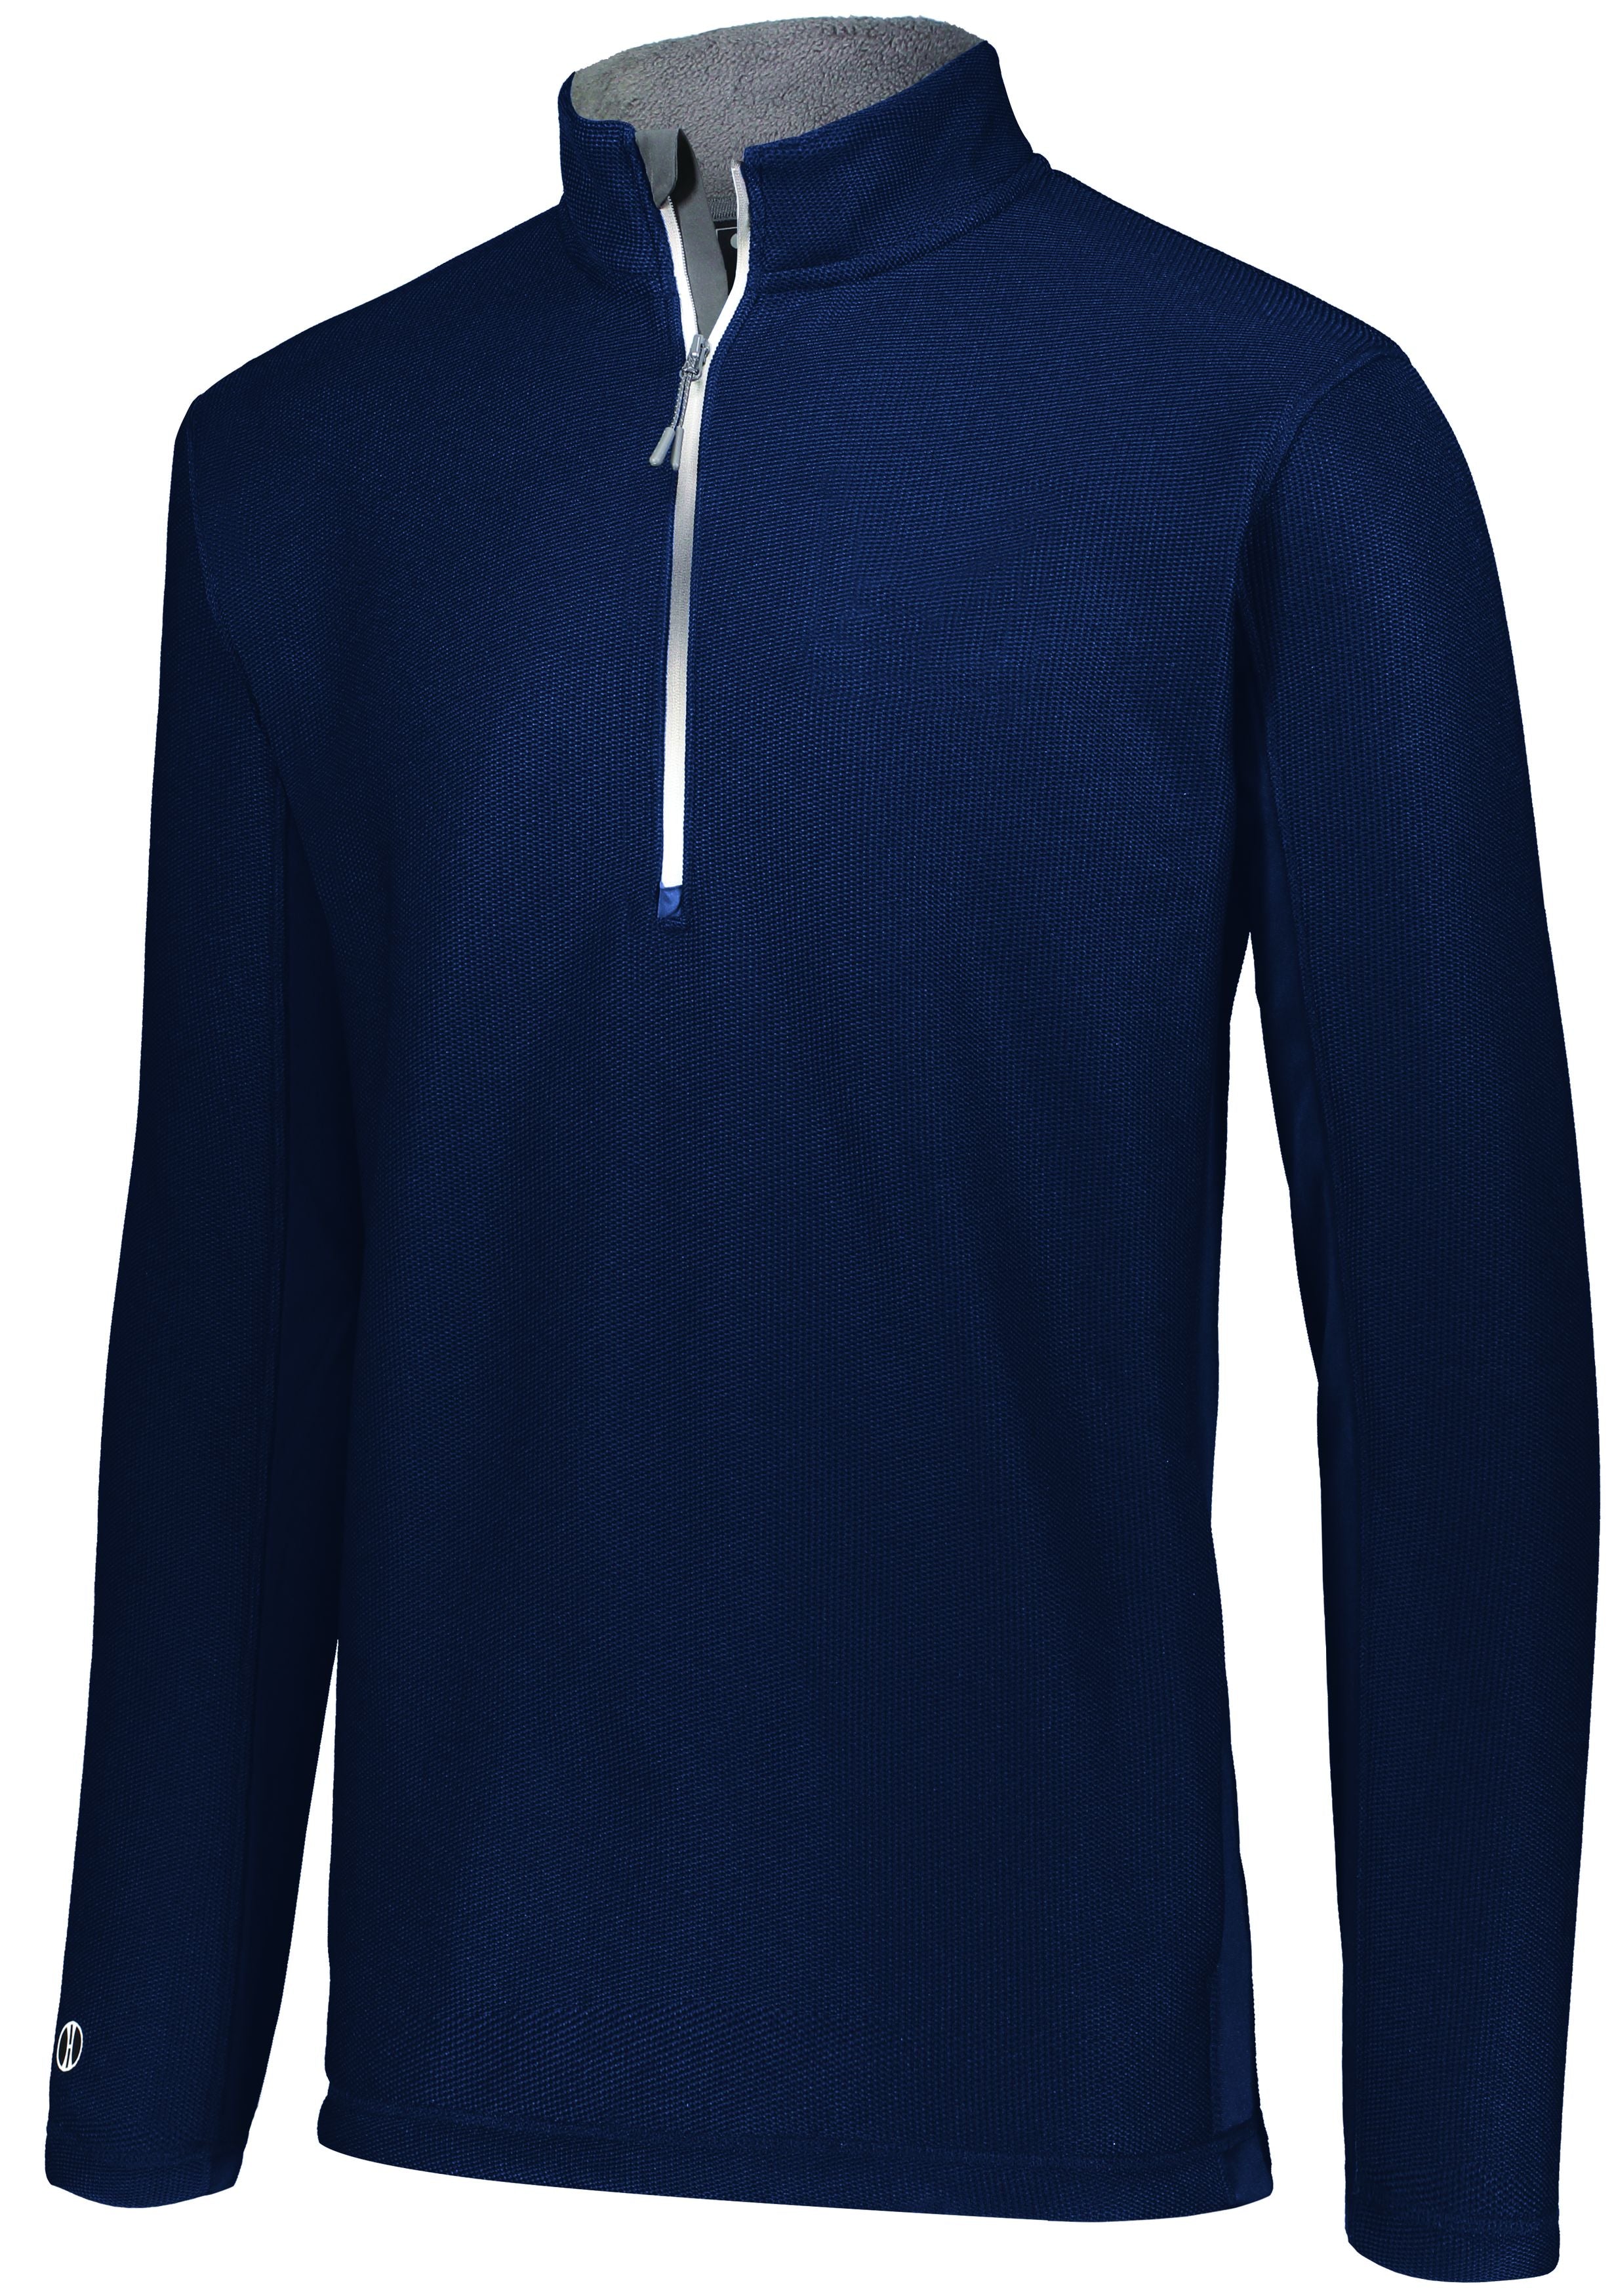 Holloway Invert 1/2 Zip Pullover in Navy  -Part of the Adult, Adult-Pullover, Holloway, Outerwear, Invert-Collection product lines at KanaleyCreations.com